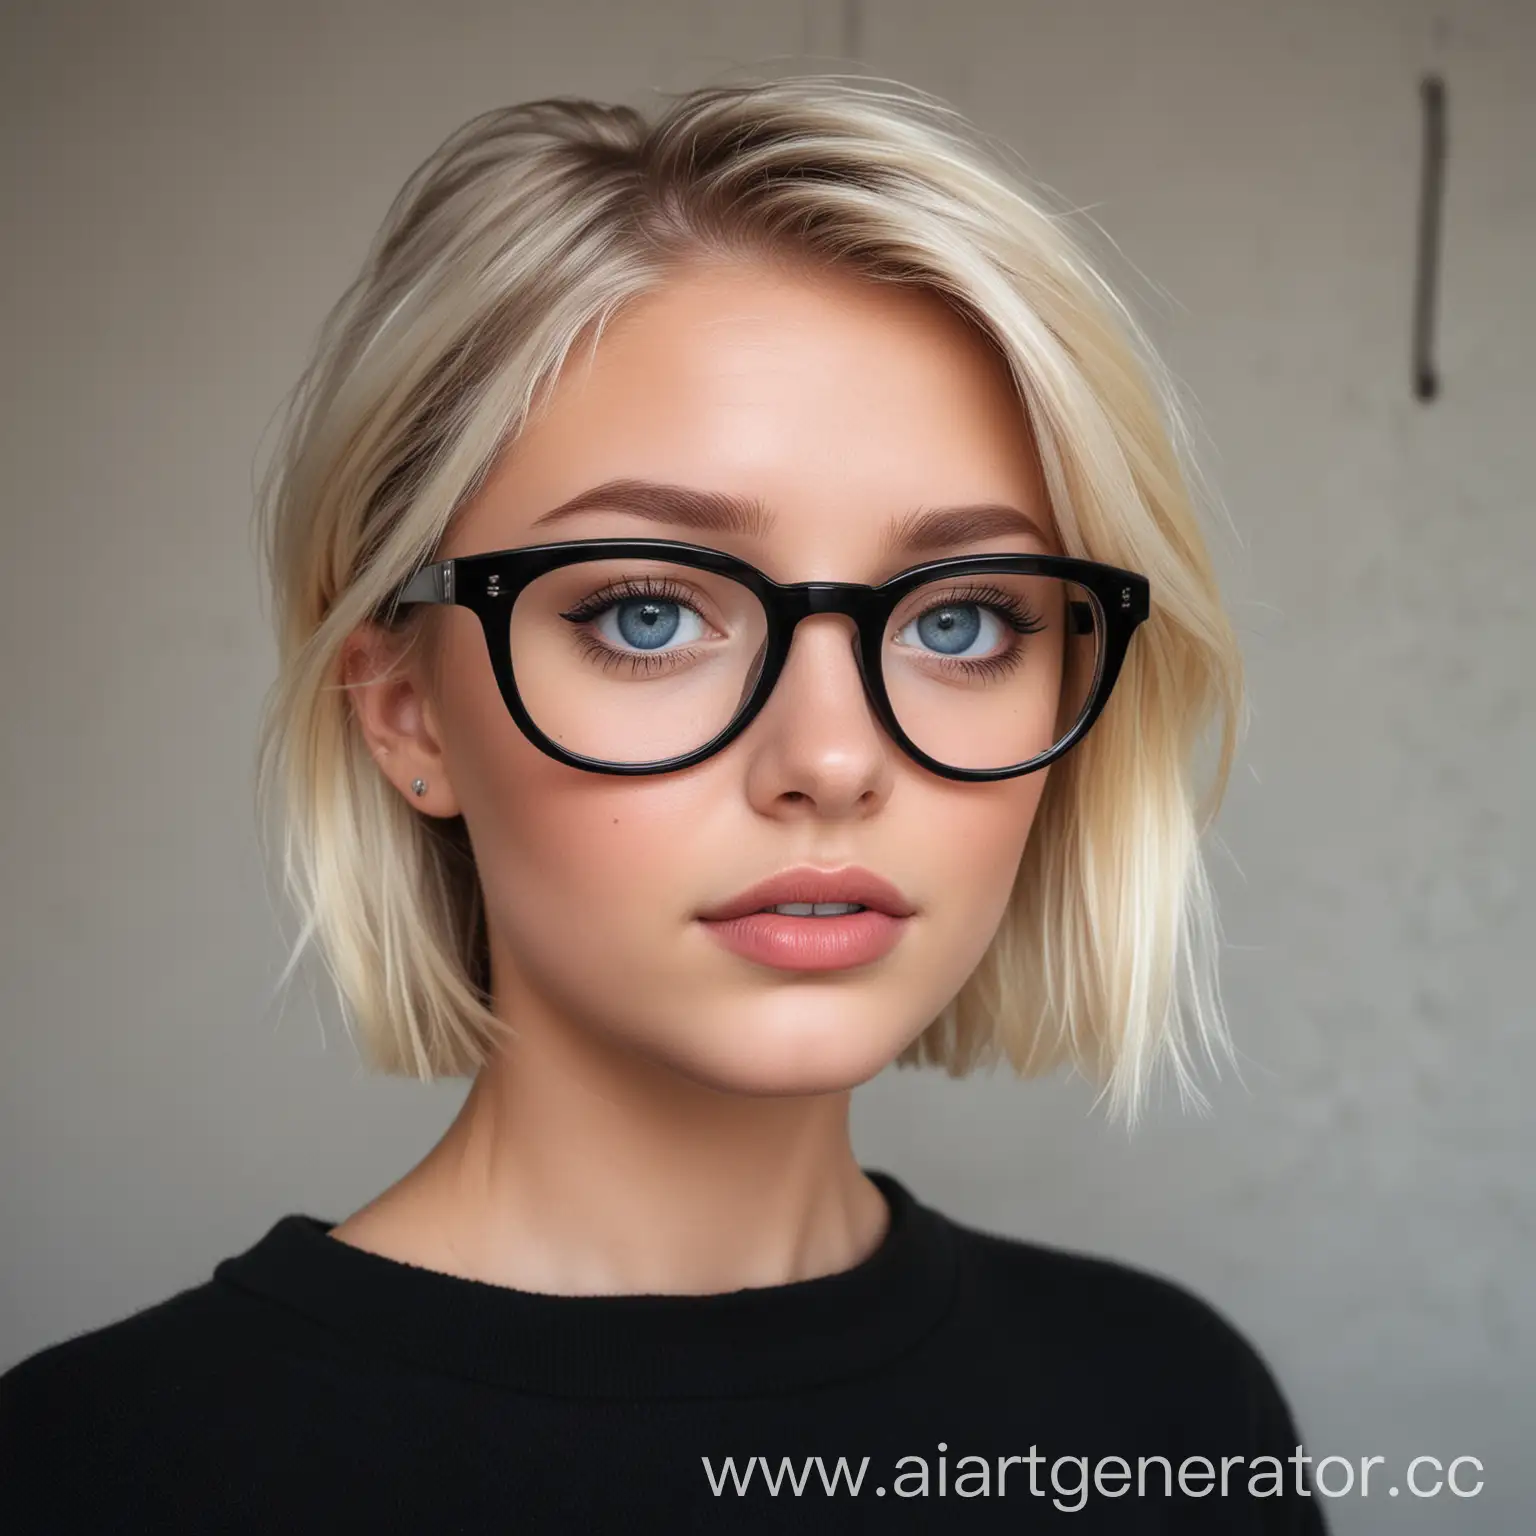 Stylish-Blonde-Girl-in-Black-Attire-with-Glasses